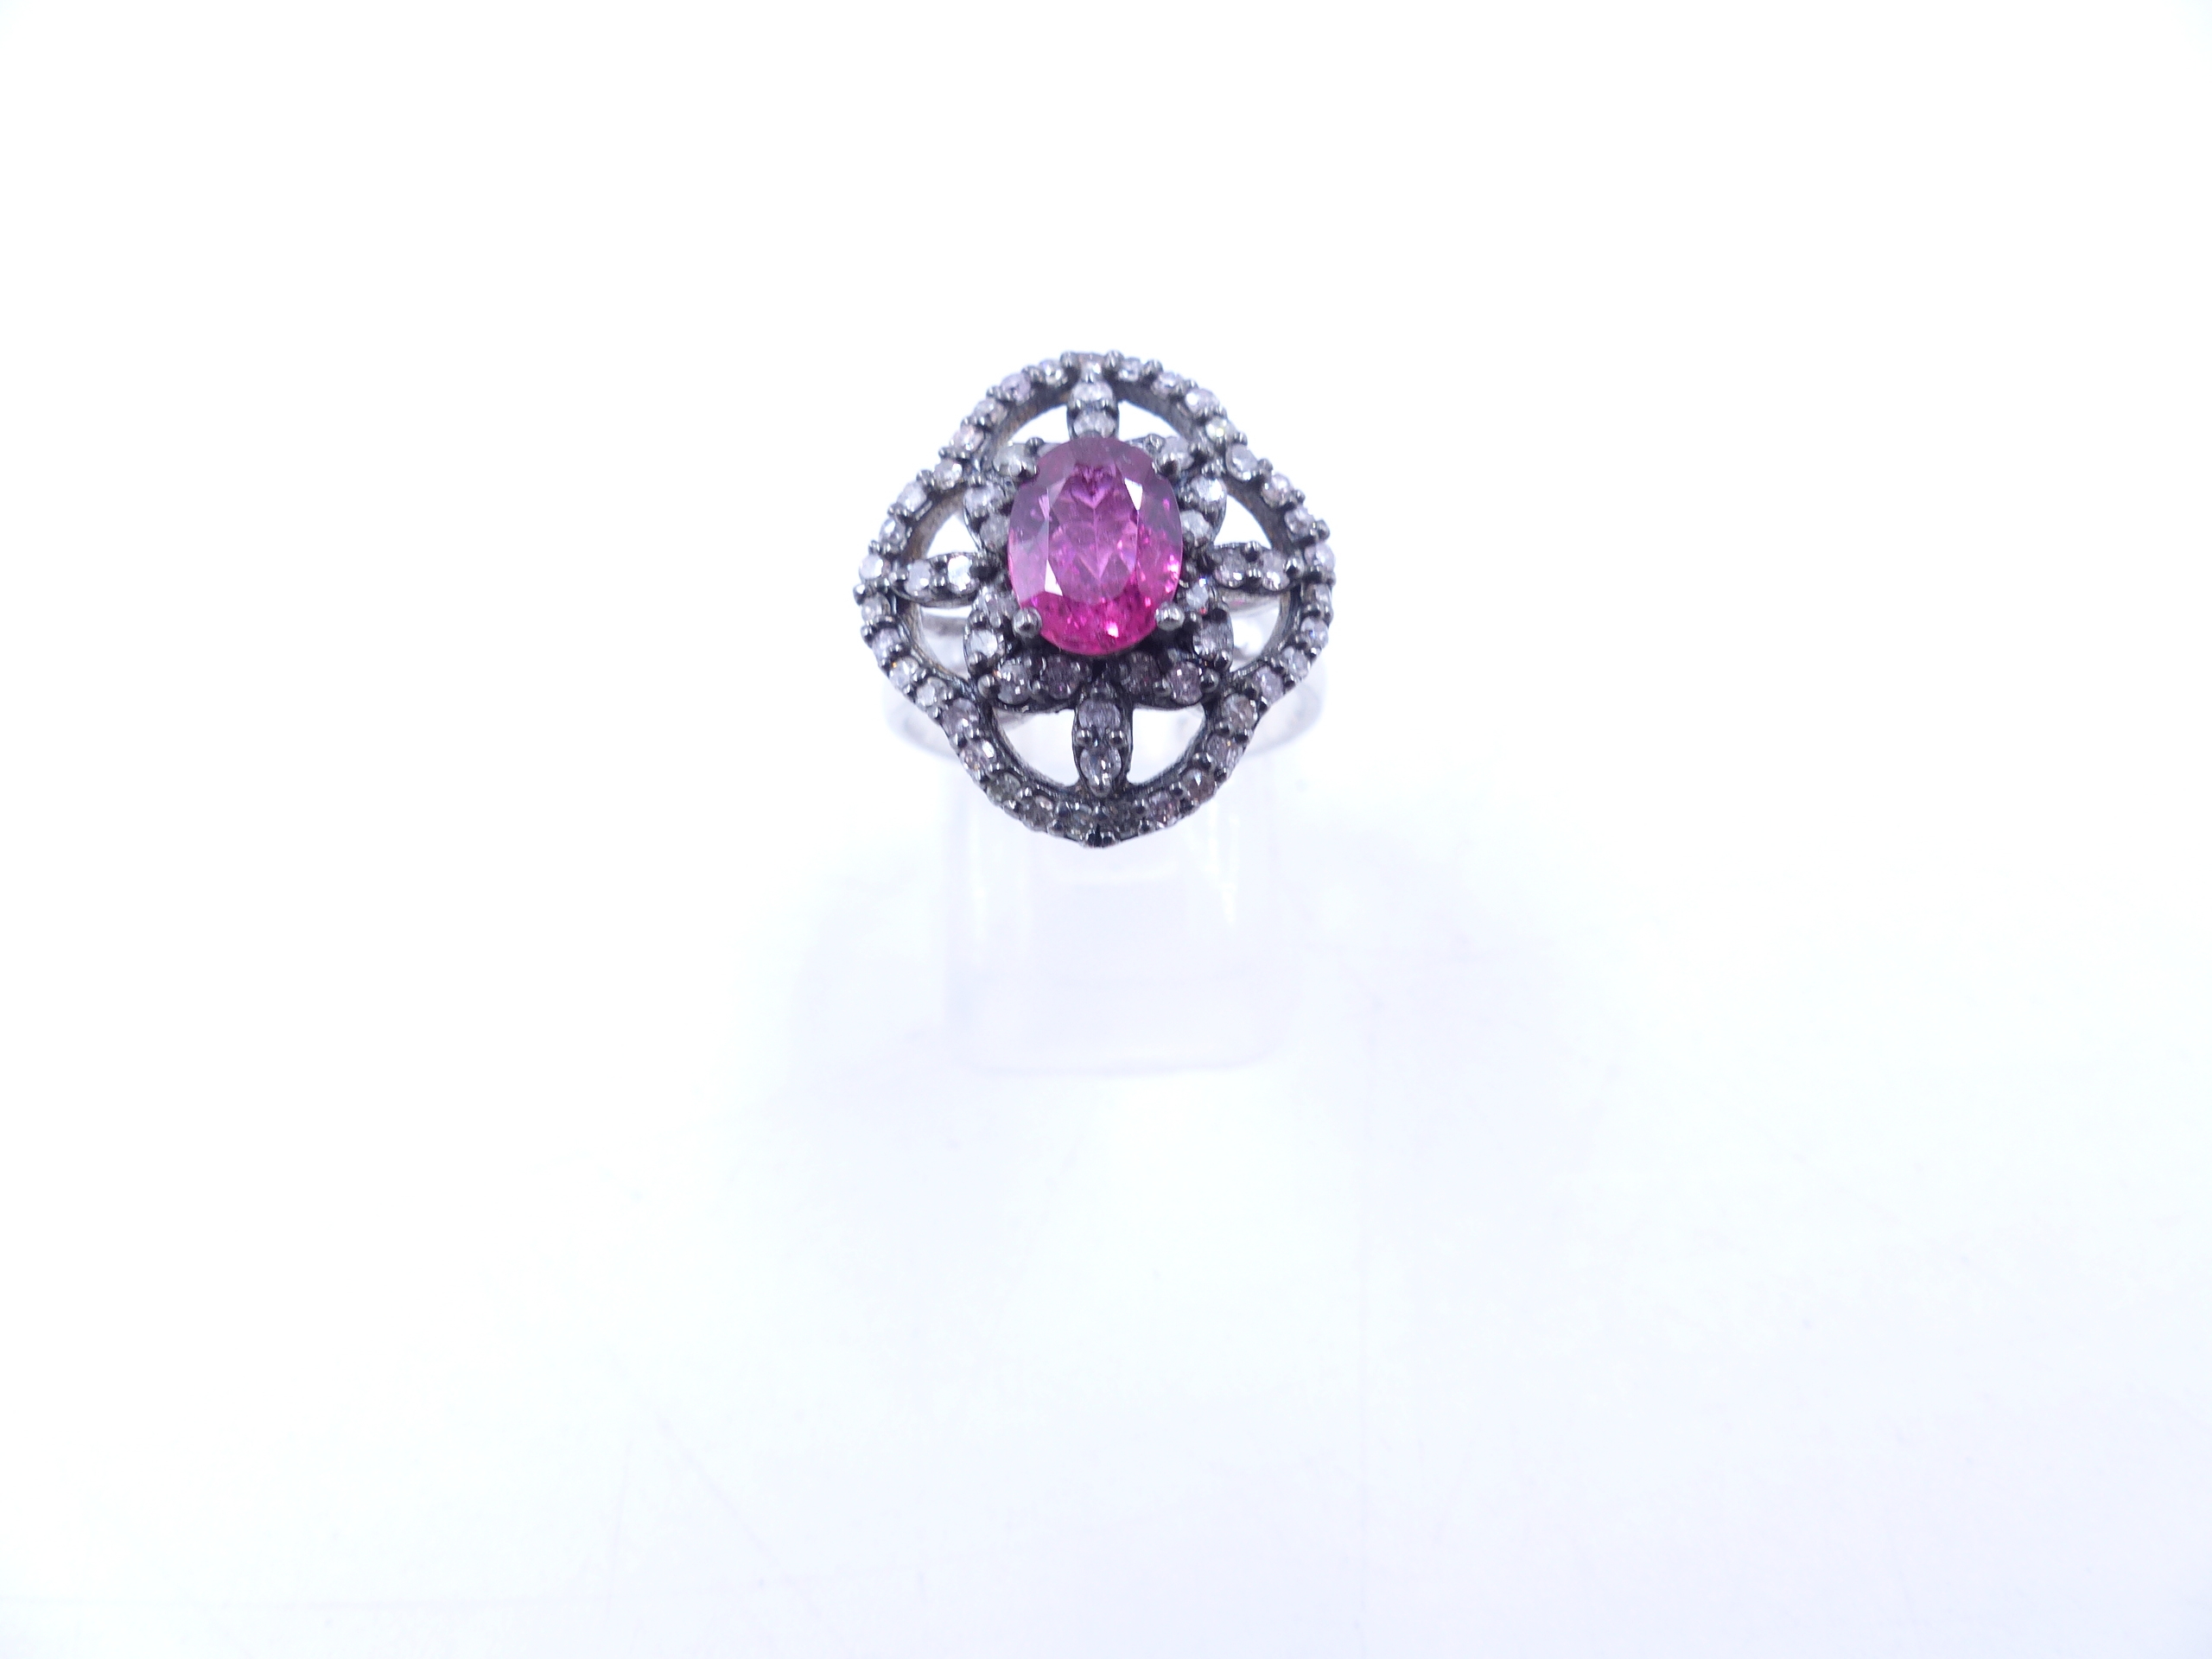 A PINK TOURMALINE AND DIAMOND OPEN WORK FILIGREE RING SET IN A WHITE METAL MOUNT,THE CENTRAL PINK - Image 16 of 17